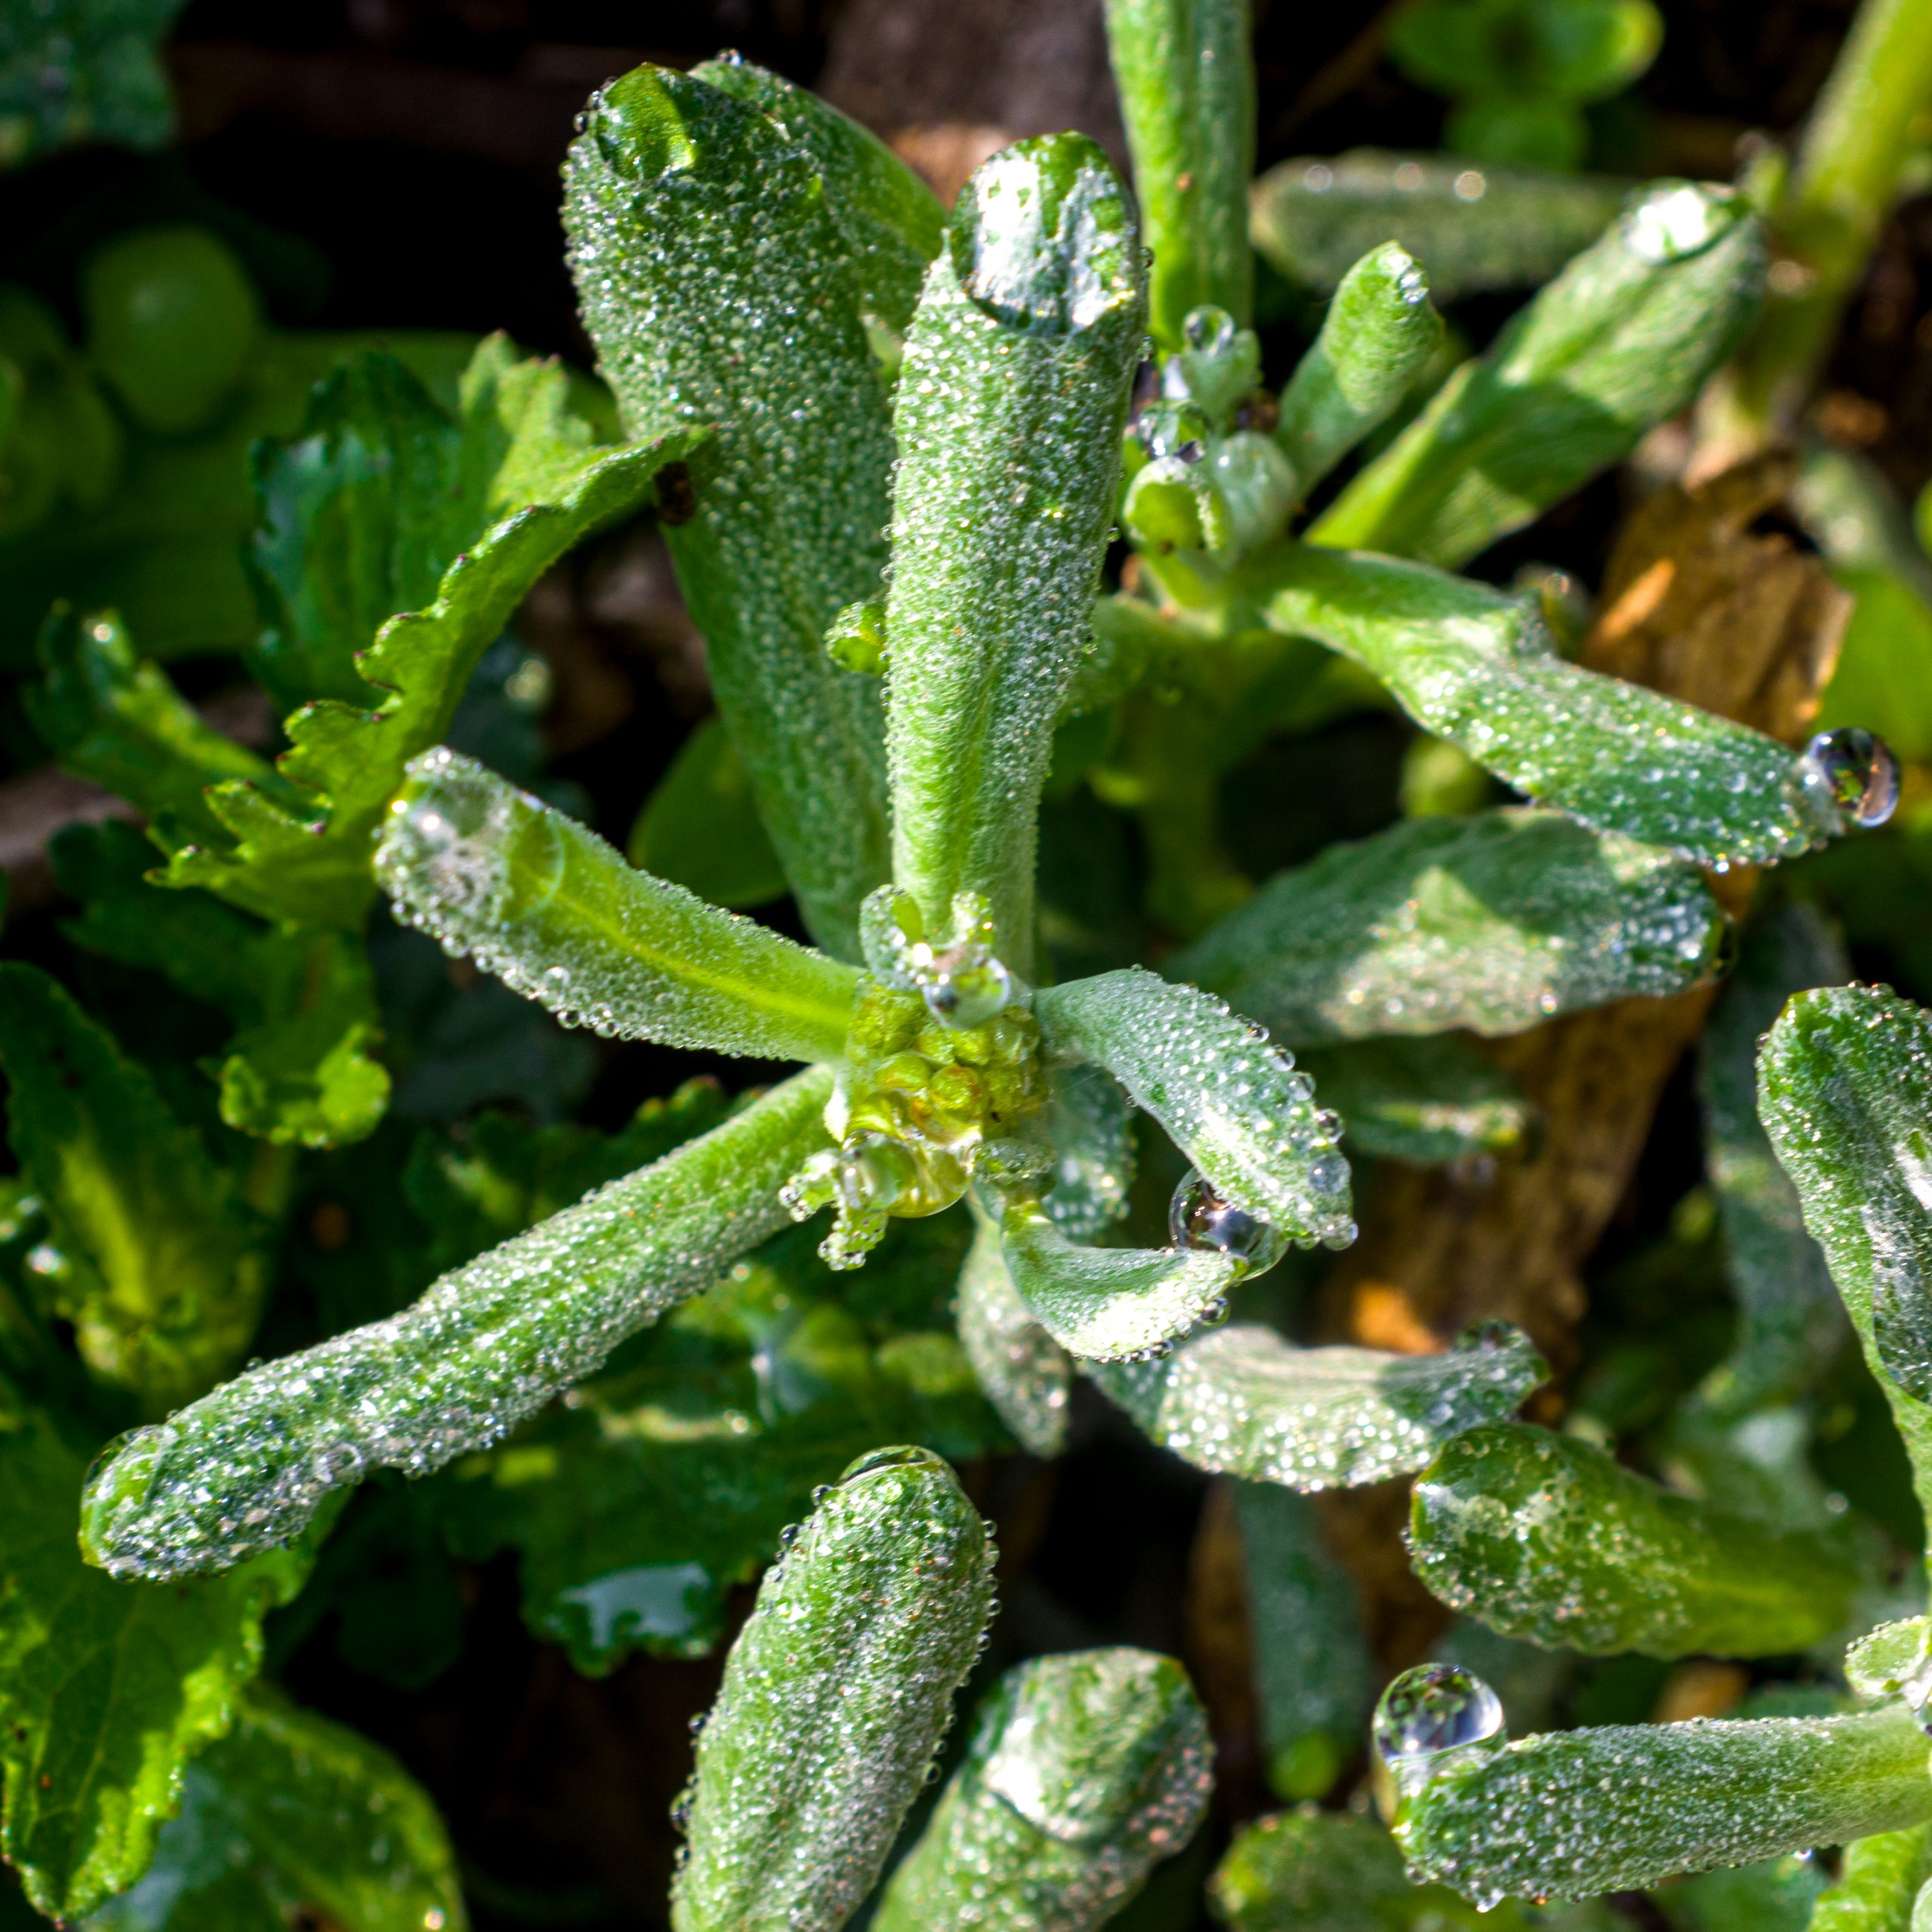 Frost and dew drops on a plant leaves